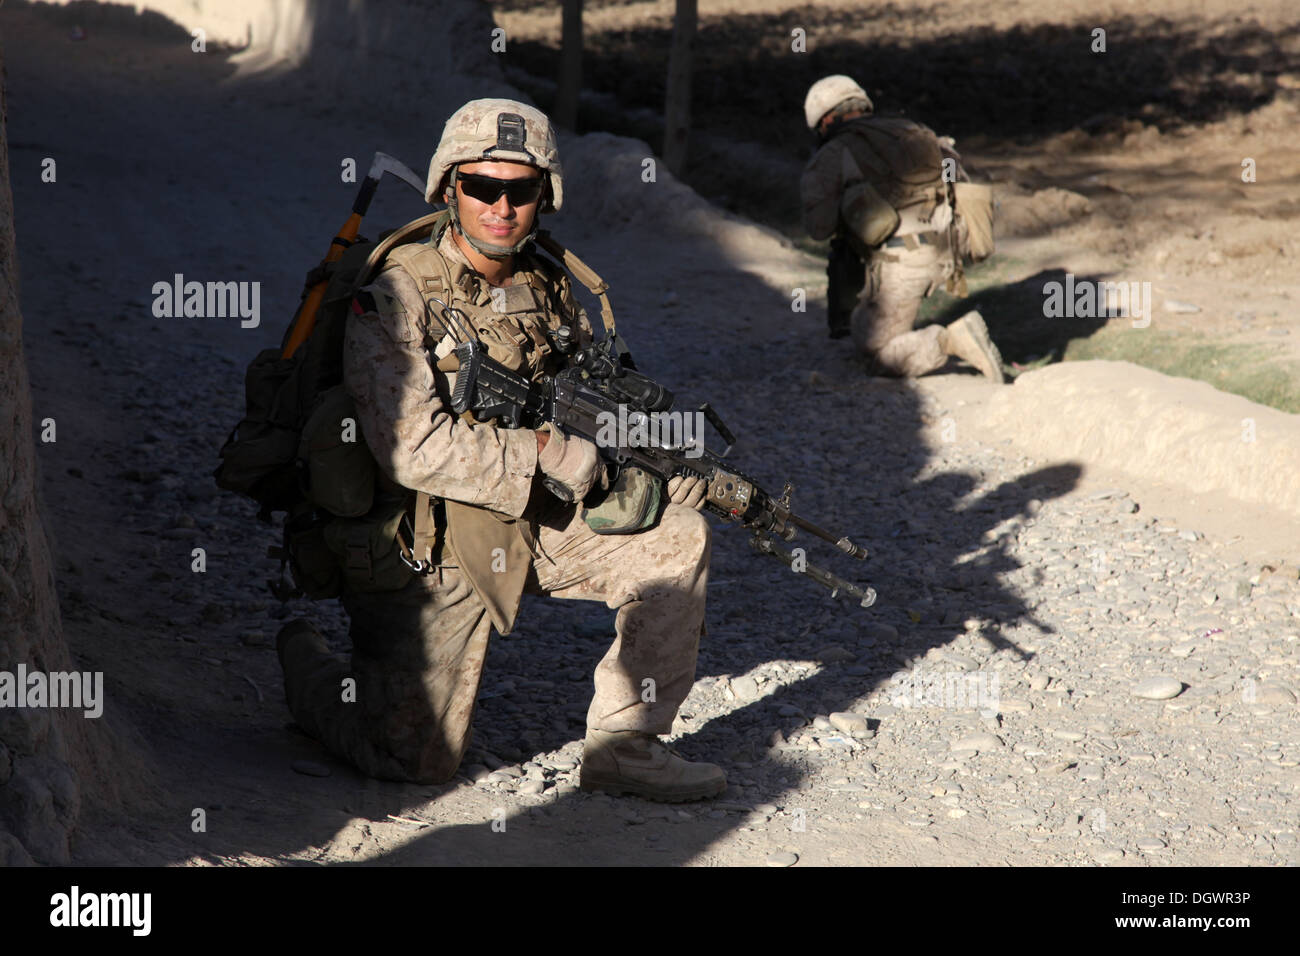 U.S. Marine Corps Lance Cpl. Marco Baro, a rifleman with India Company, 3rd Battalion, 7th Marine Regiment, kneels during a patrol near Forward Operating Base Musa Qala, Helmand province, Afghanistan, Oct. 20, 2013. The Marines with 3/7 patrolled to reduc Stock Photo